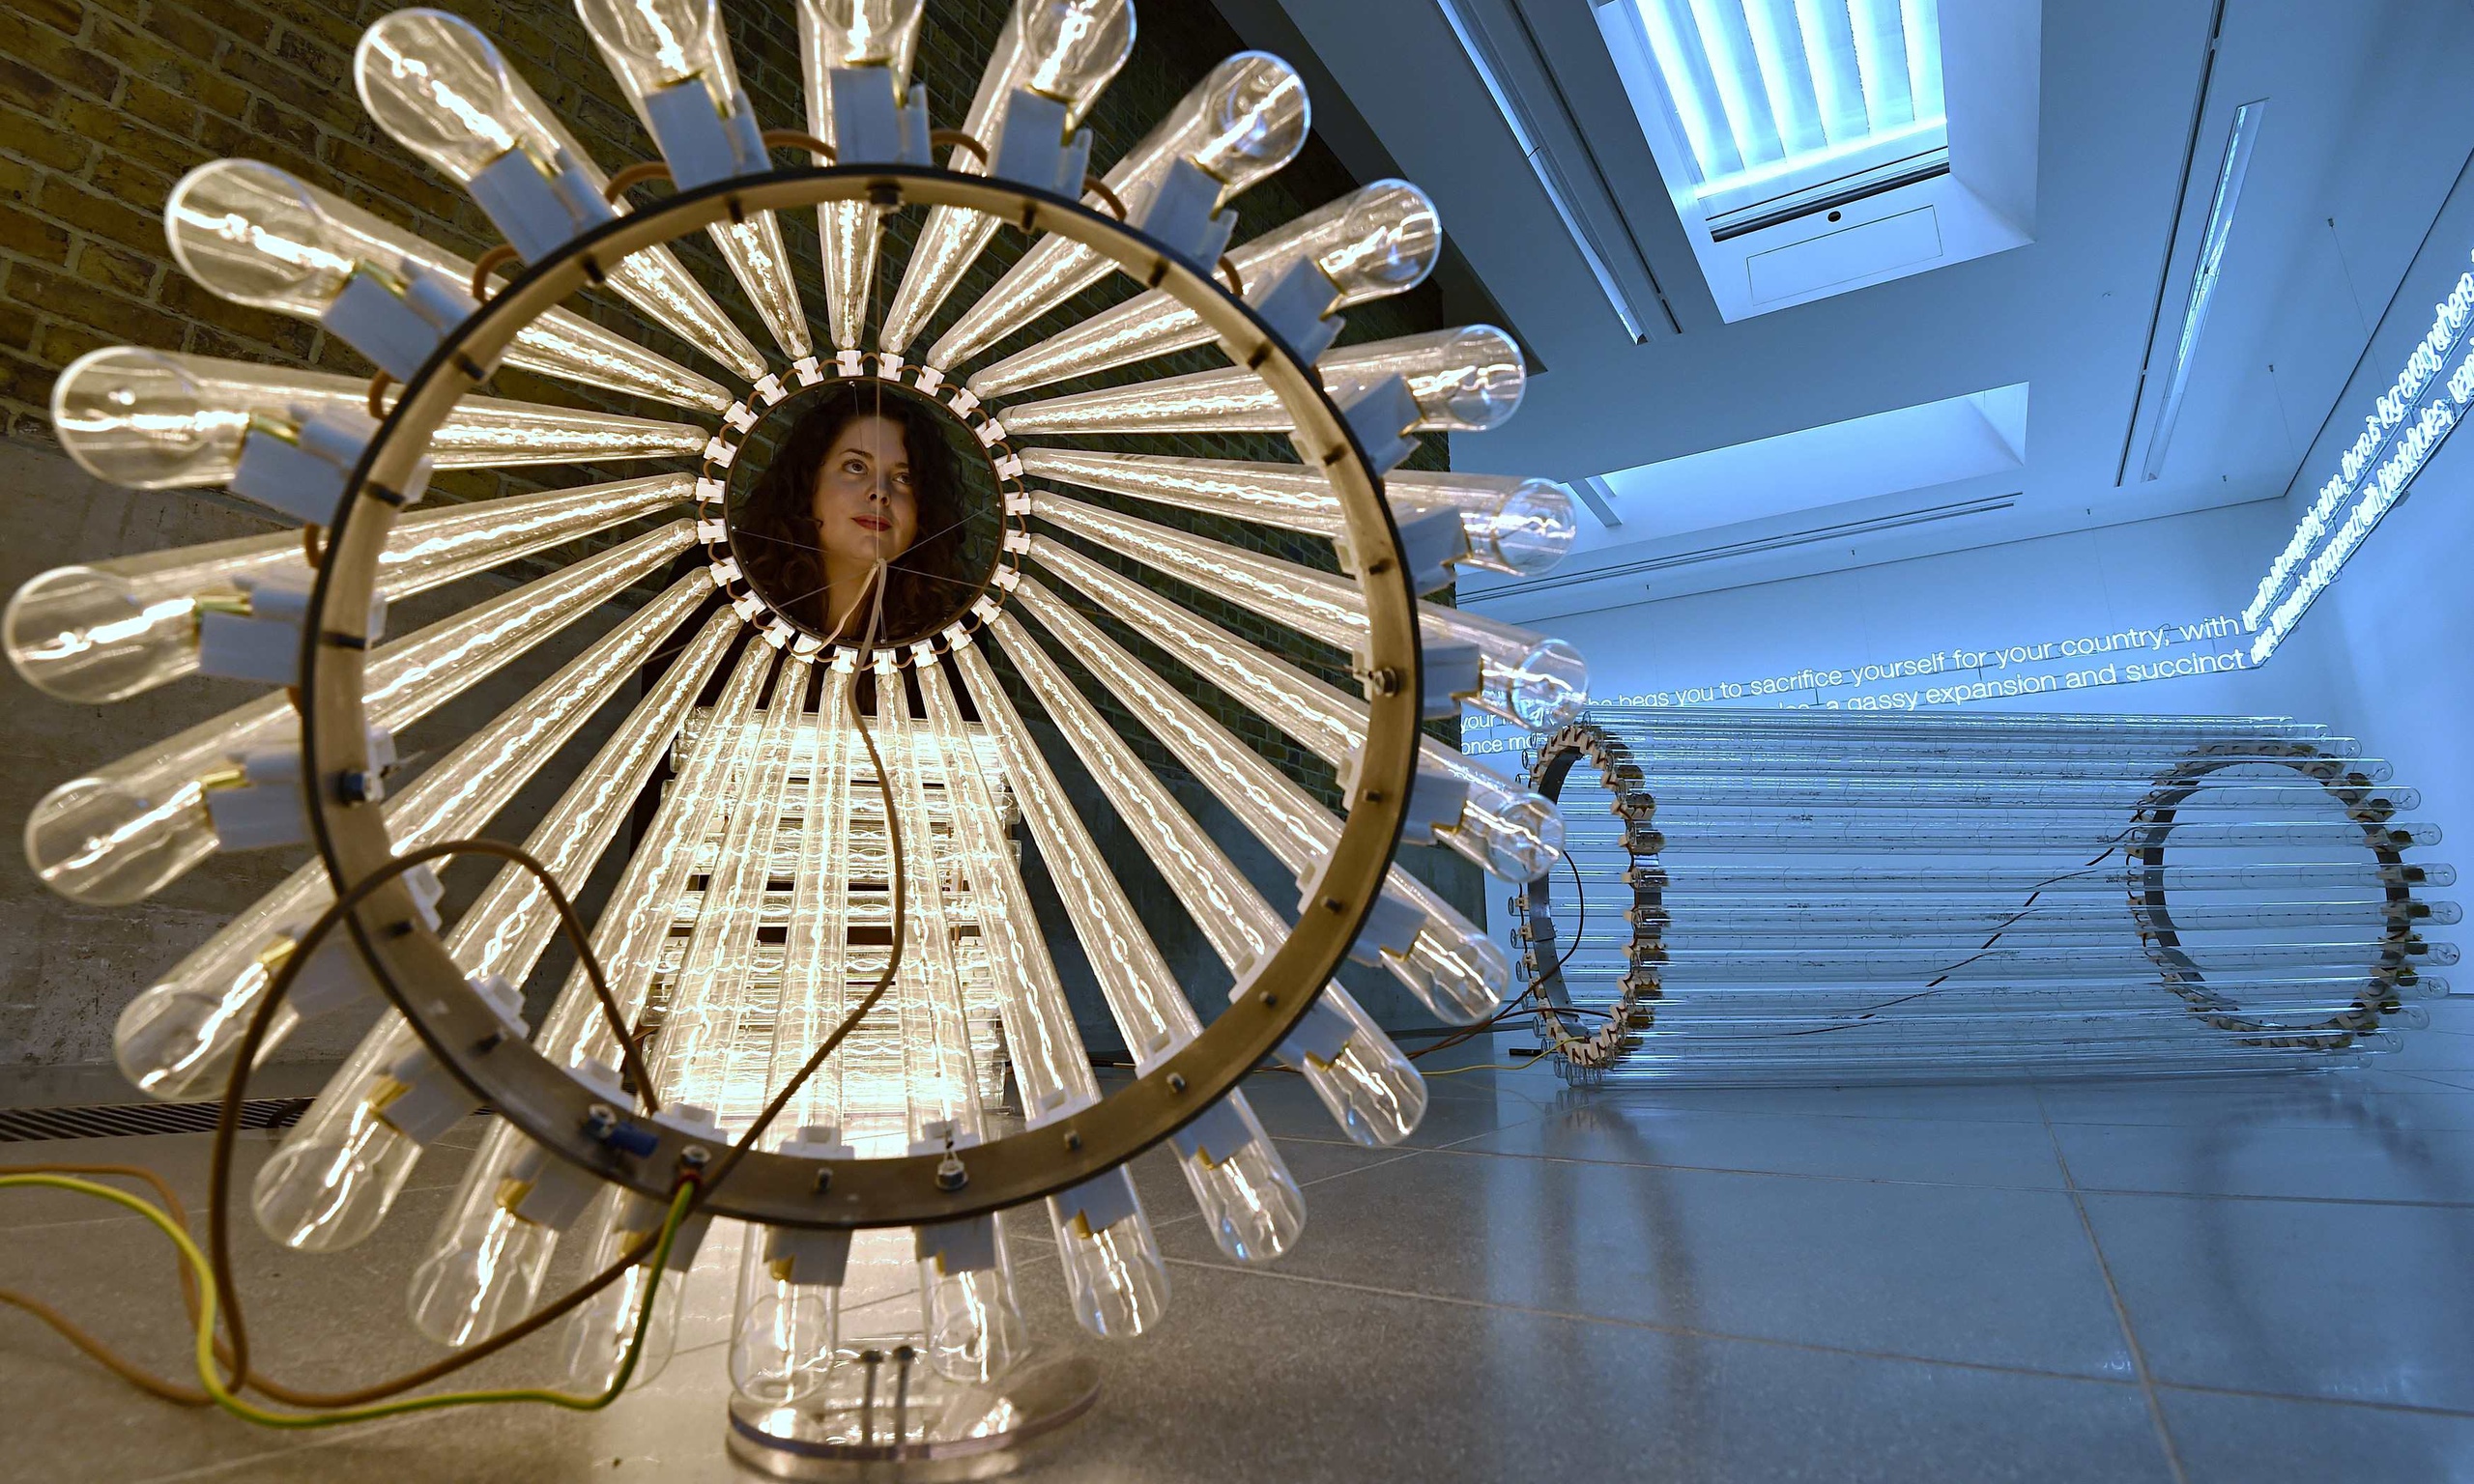 Cerith Wyn Evans Review Looking At Art Has Rarely Felt Like Such A Vain Pose Art And Design